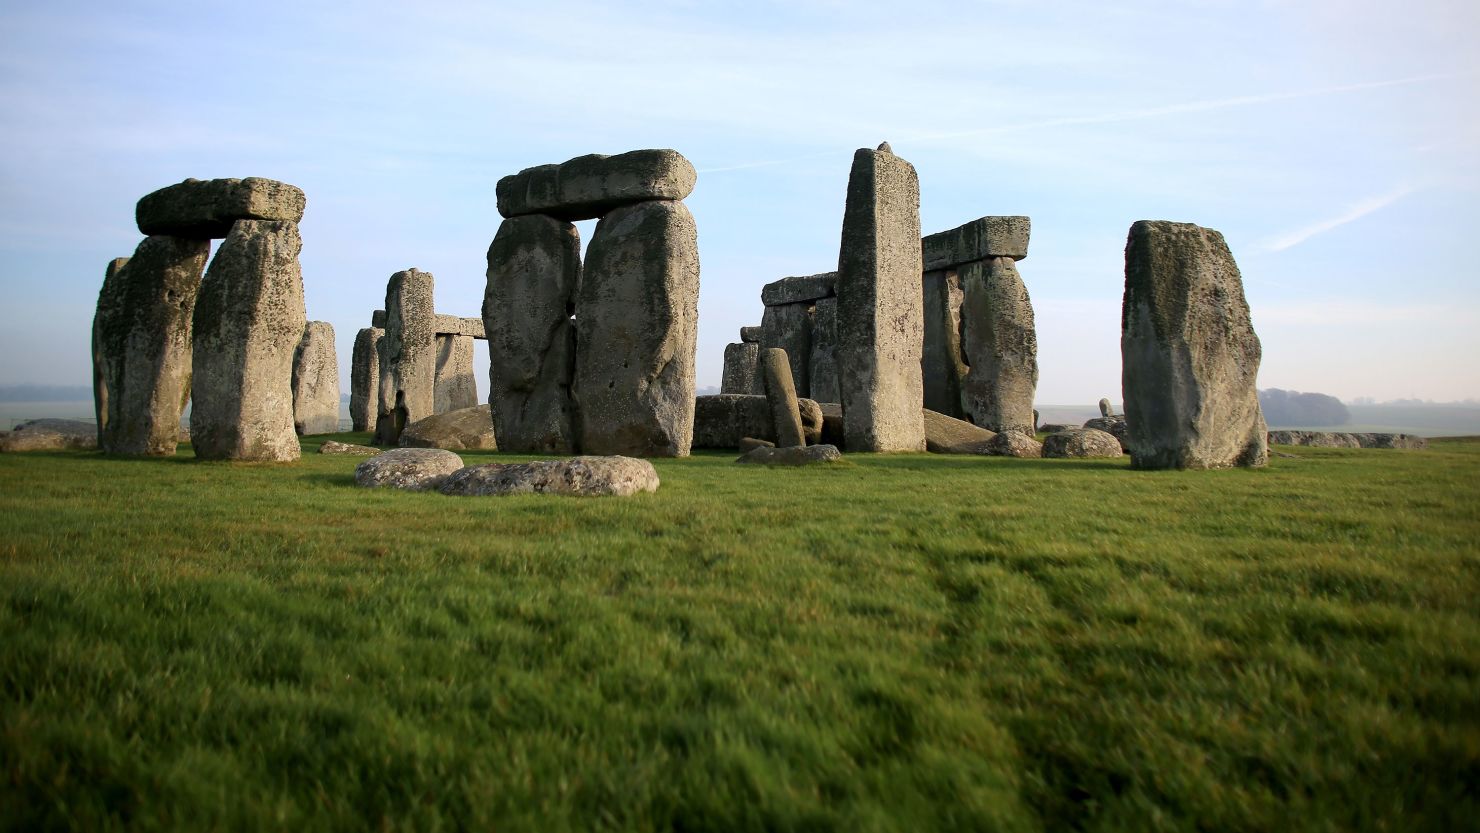 Stonehenge, which was built between 3,000 BC and 1,600 BC, attracts around 900,000 visitors a year and is in very close proximity to a major road.